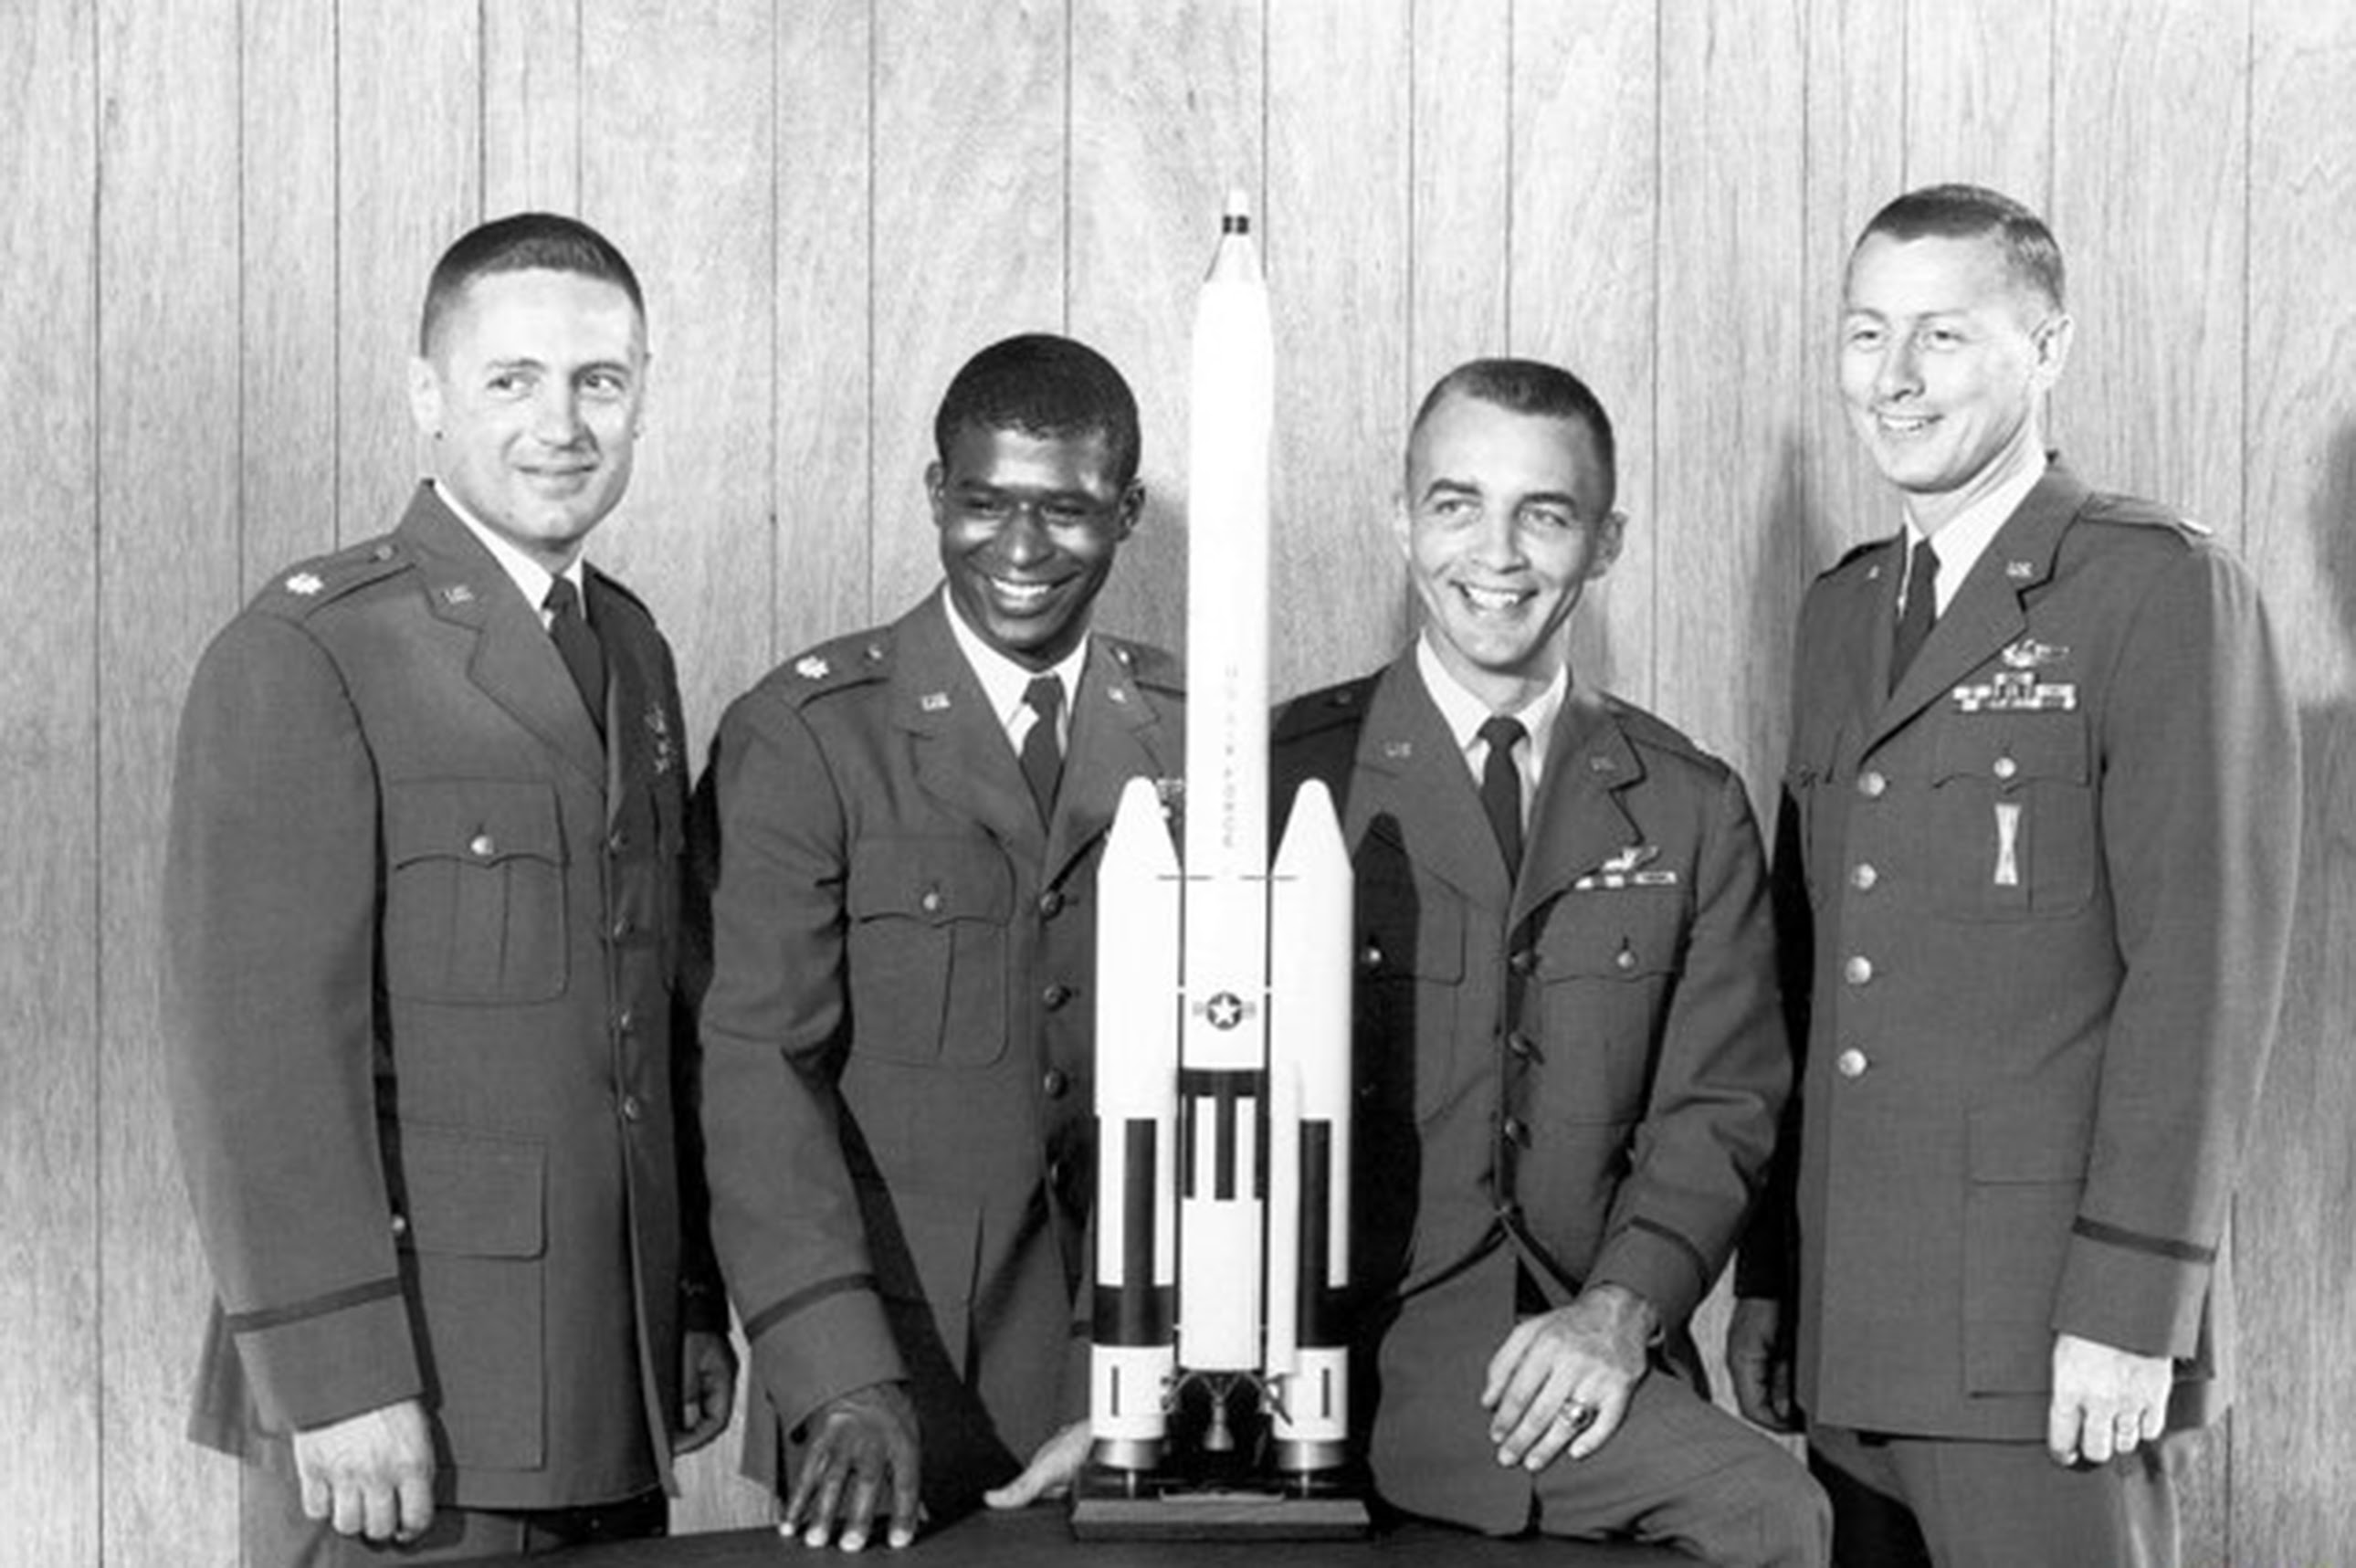 a group of uniformed men smiling and posing with a model rocket